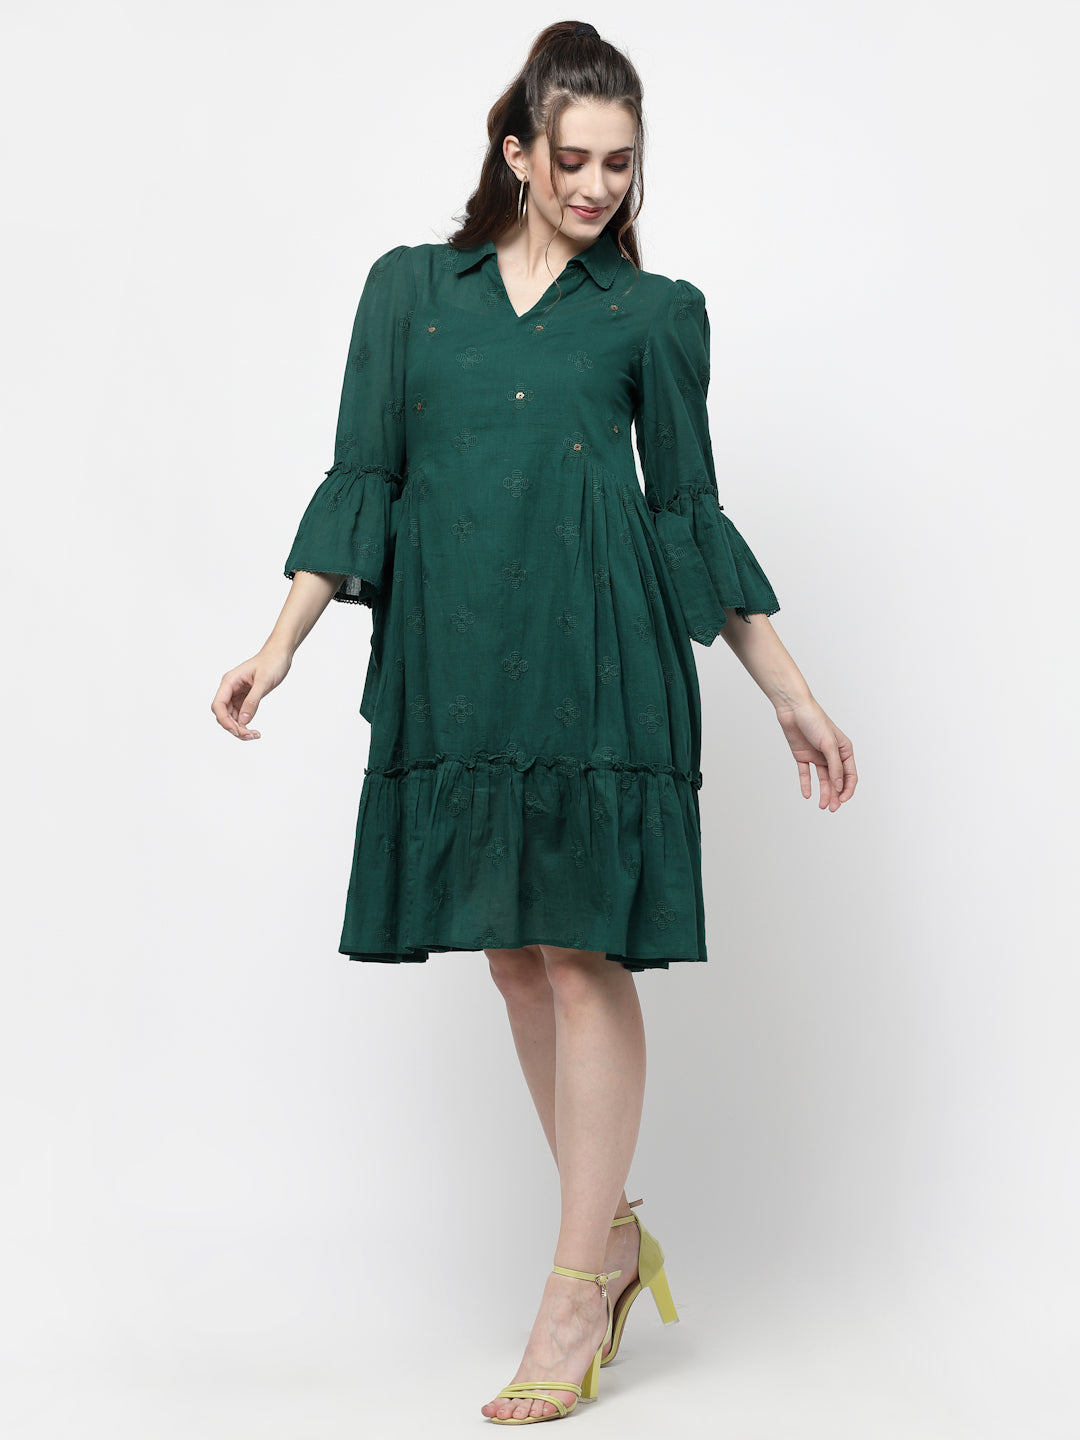 Terquois Casual Dress with Unique Collar Neck,Ruffles and Gathers Dresses TERQUOIS   